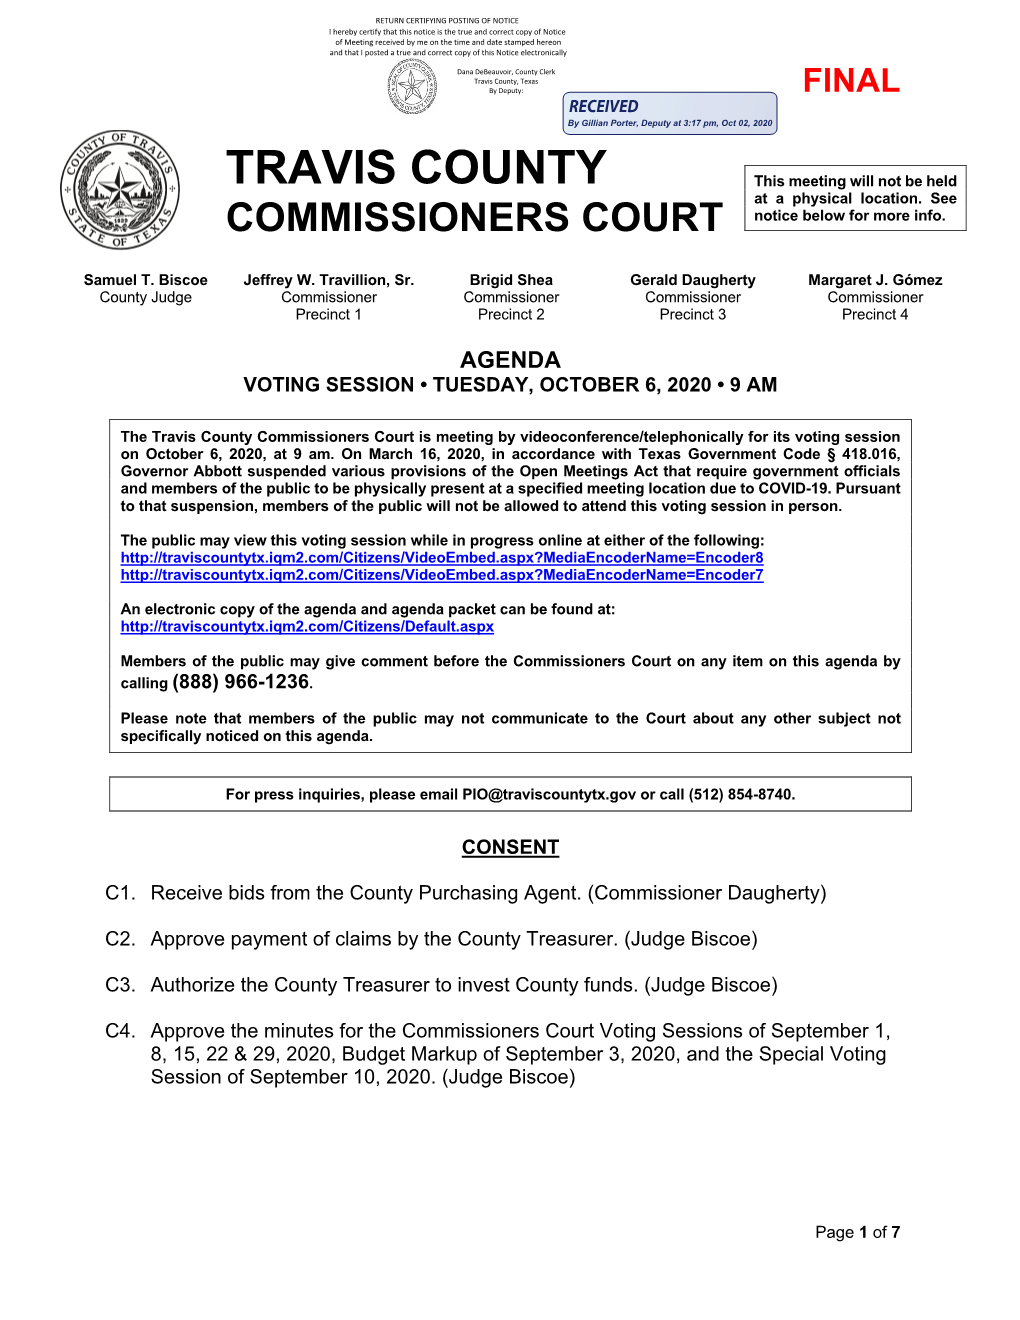 Travis County Commissioners Court Is Meeting by Videoconference/Telephonically for Its Voting Session on October 6, 2020, at 9 Am